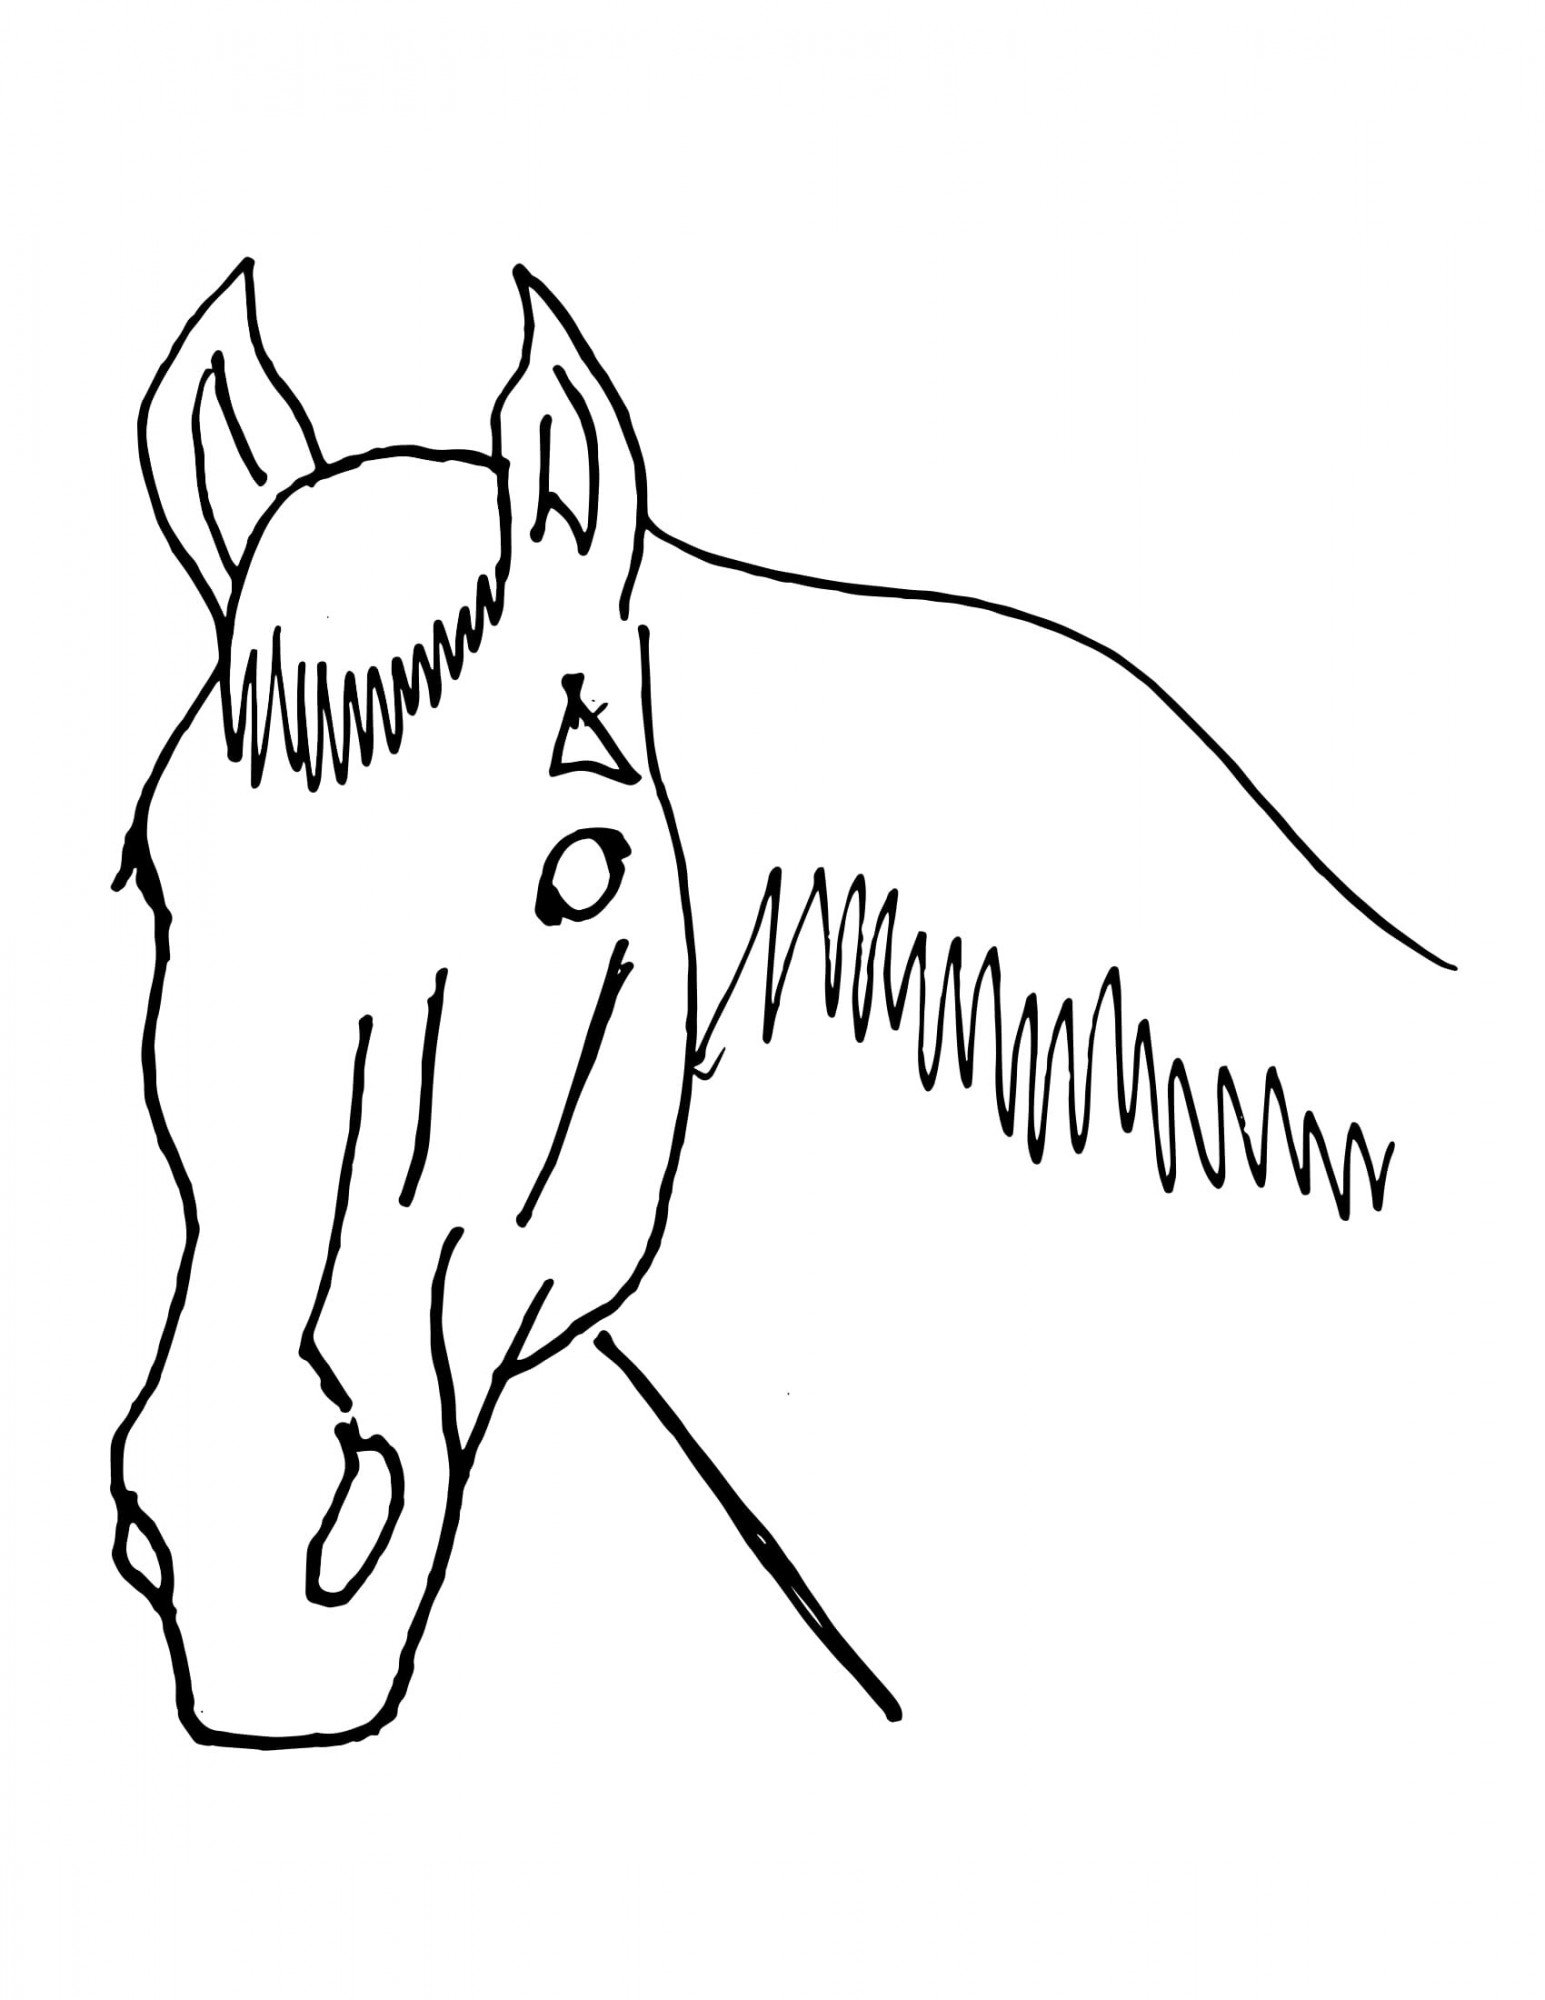 Horse "Brass" - black and white outline for coloring